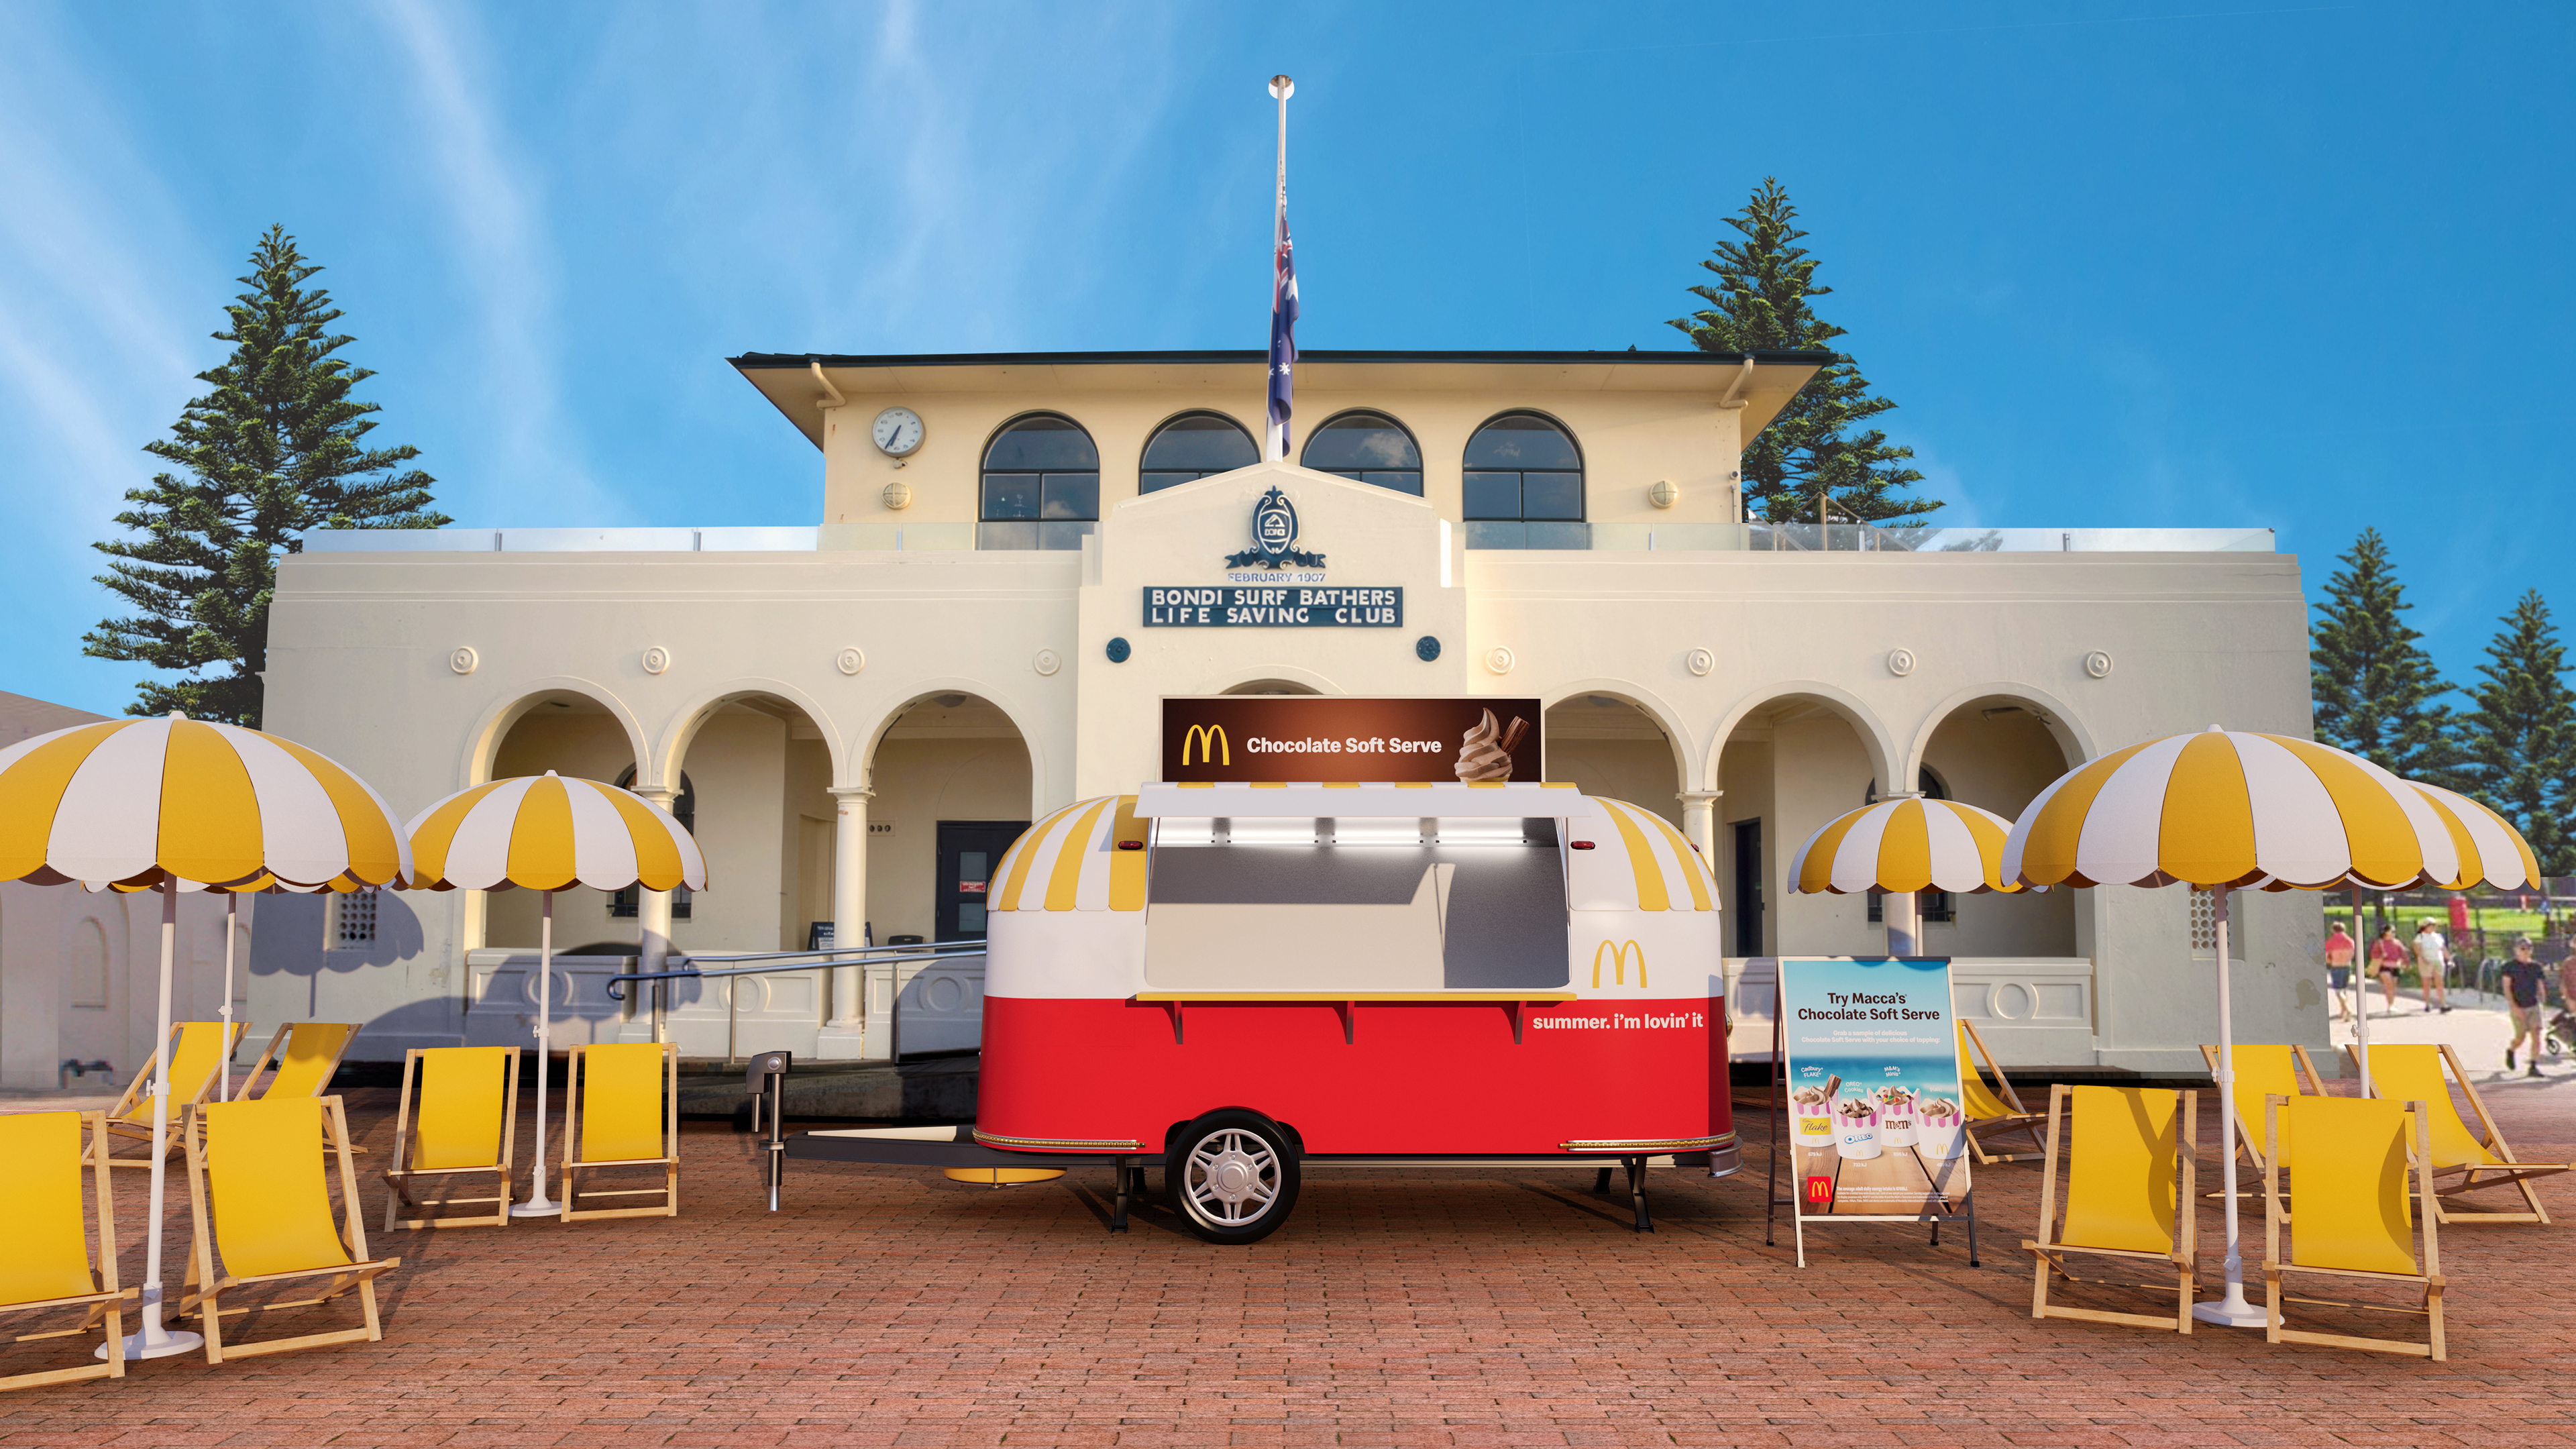 A Macca&#x27;s Soft Serve Van, in red, flanked by yellow beach umbrellas.